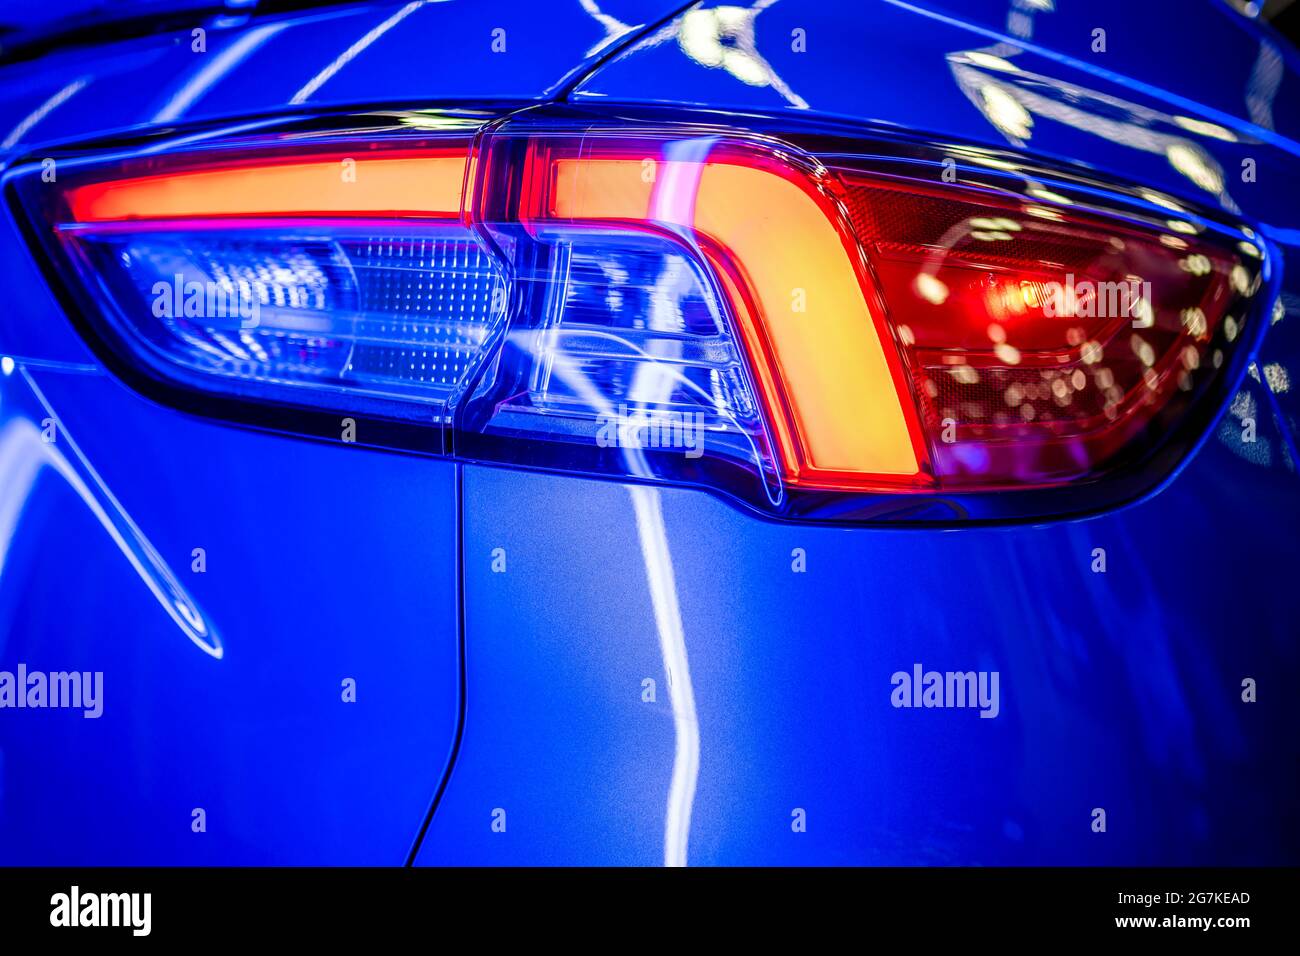 https://c8.alamy.com/comp/2G7KEAD/fragment-of-the-turned-on-glass-taillight-of-the-blue-shiny-car-with-neon-light-reflection-and-glare-of-surrounding-objects-on-the-combined-relief-of-2G7KEAD.jpg